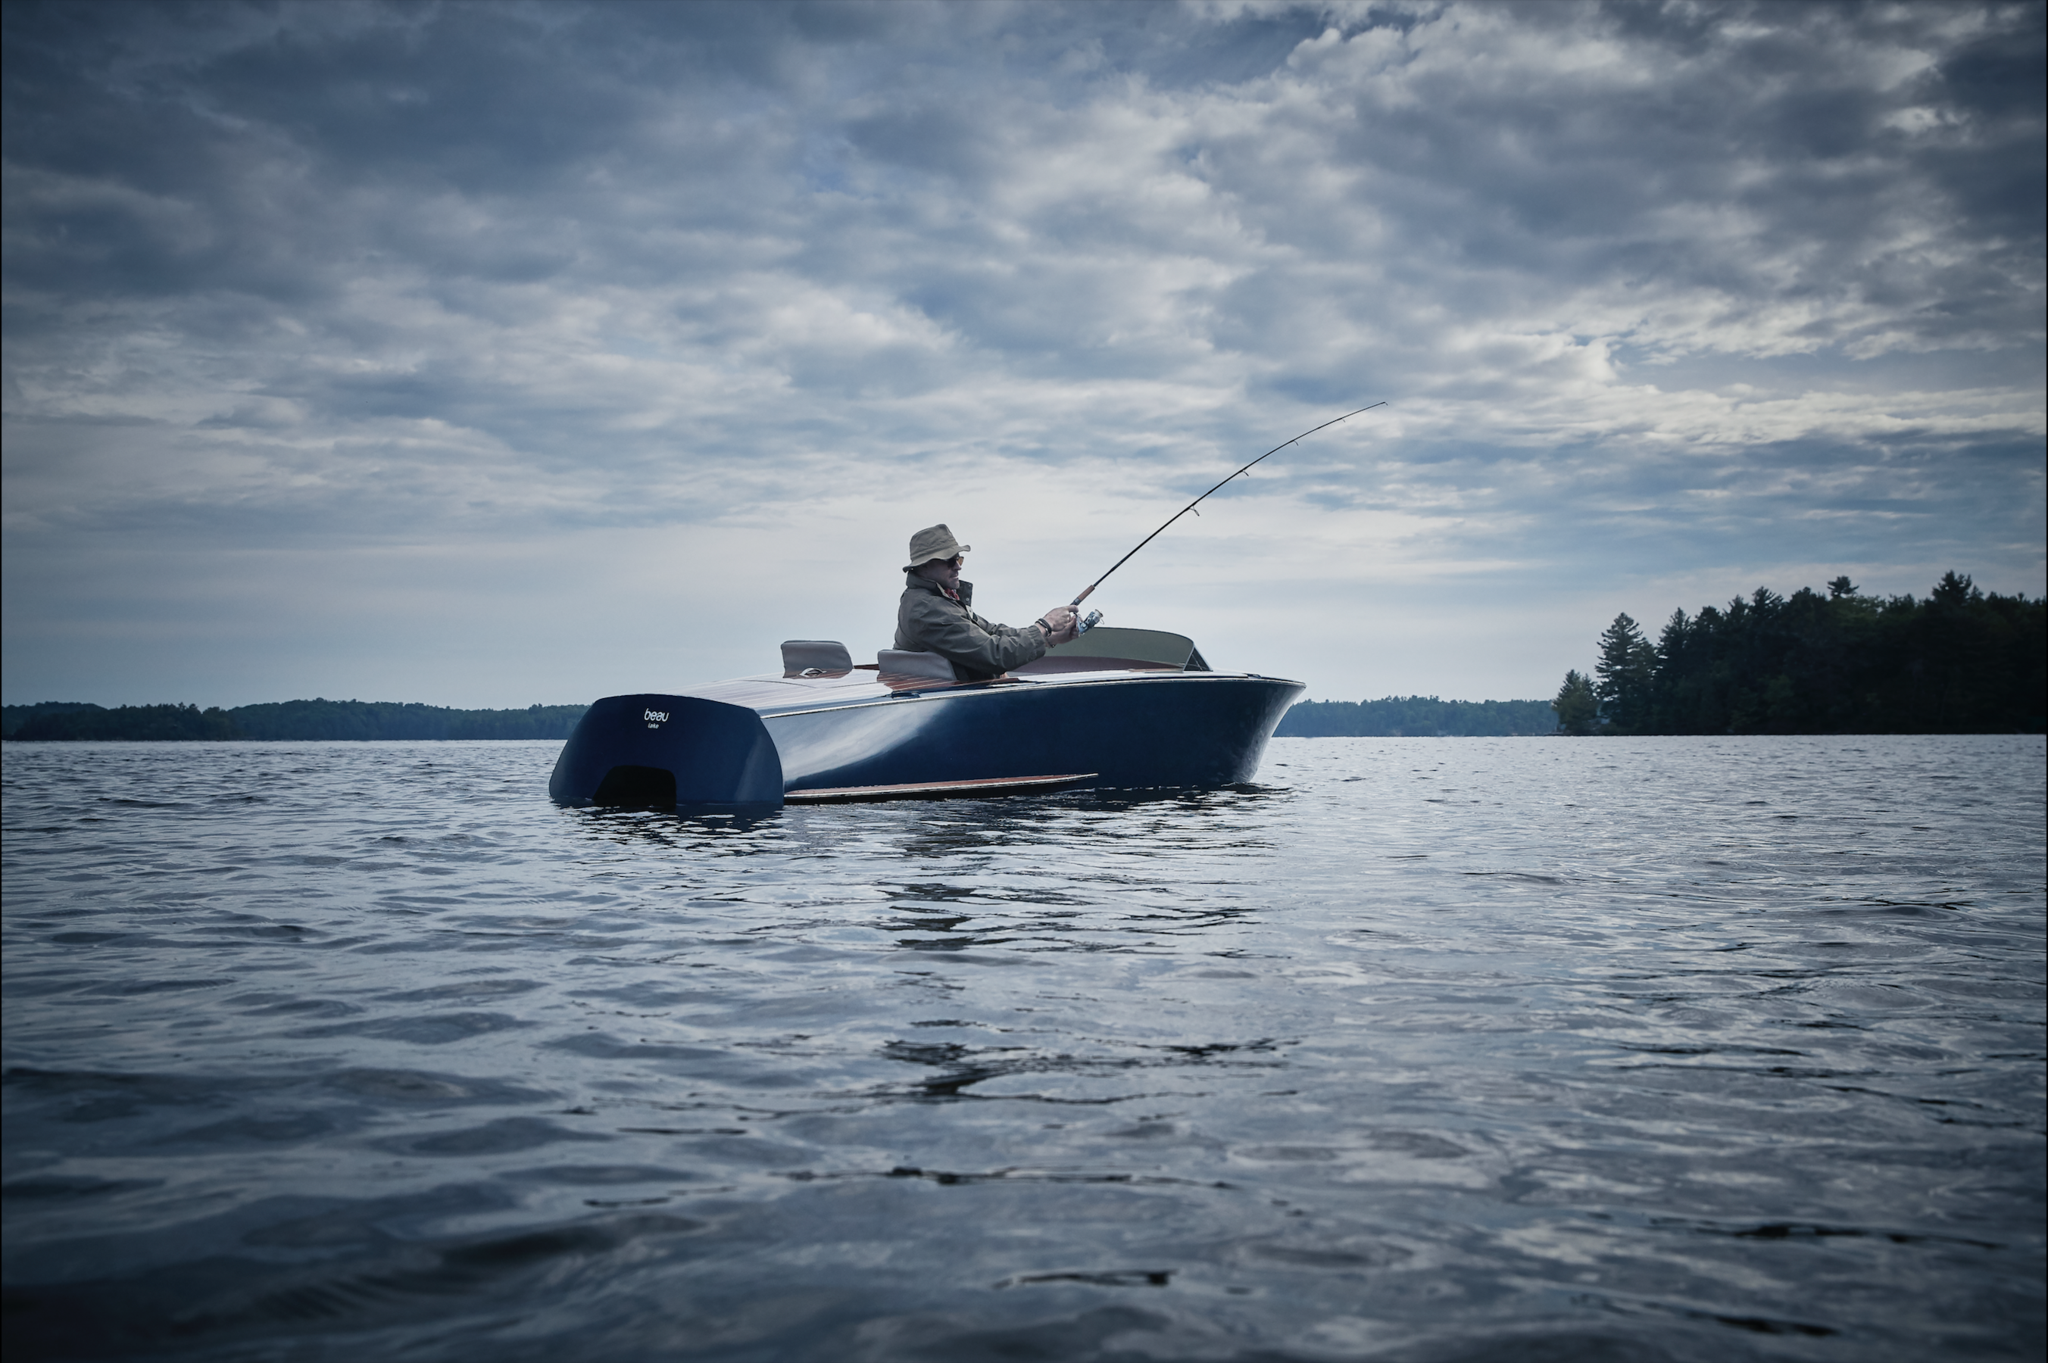 TreeHugger - "The Beau Lake Runabout re-invents the Pedal Boat"